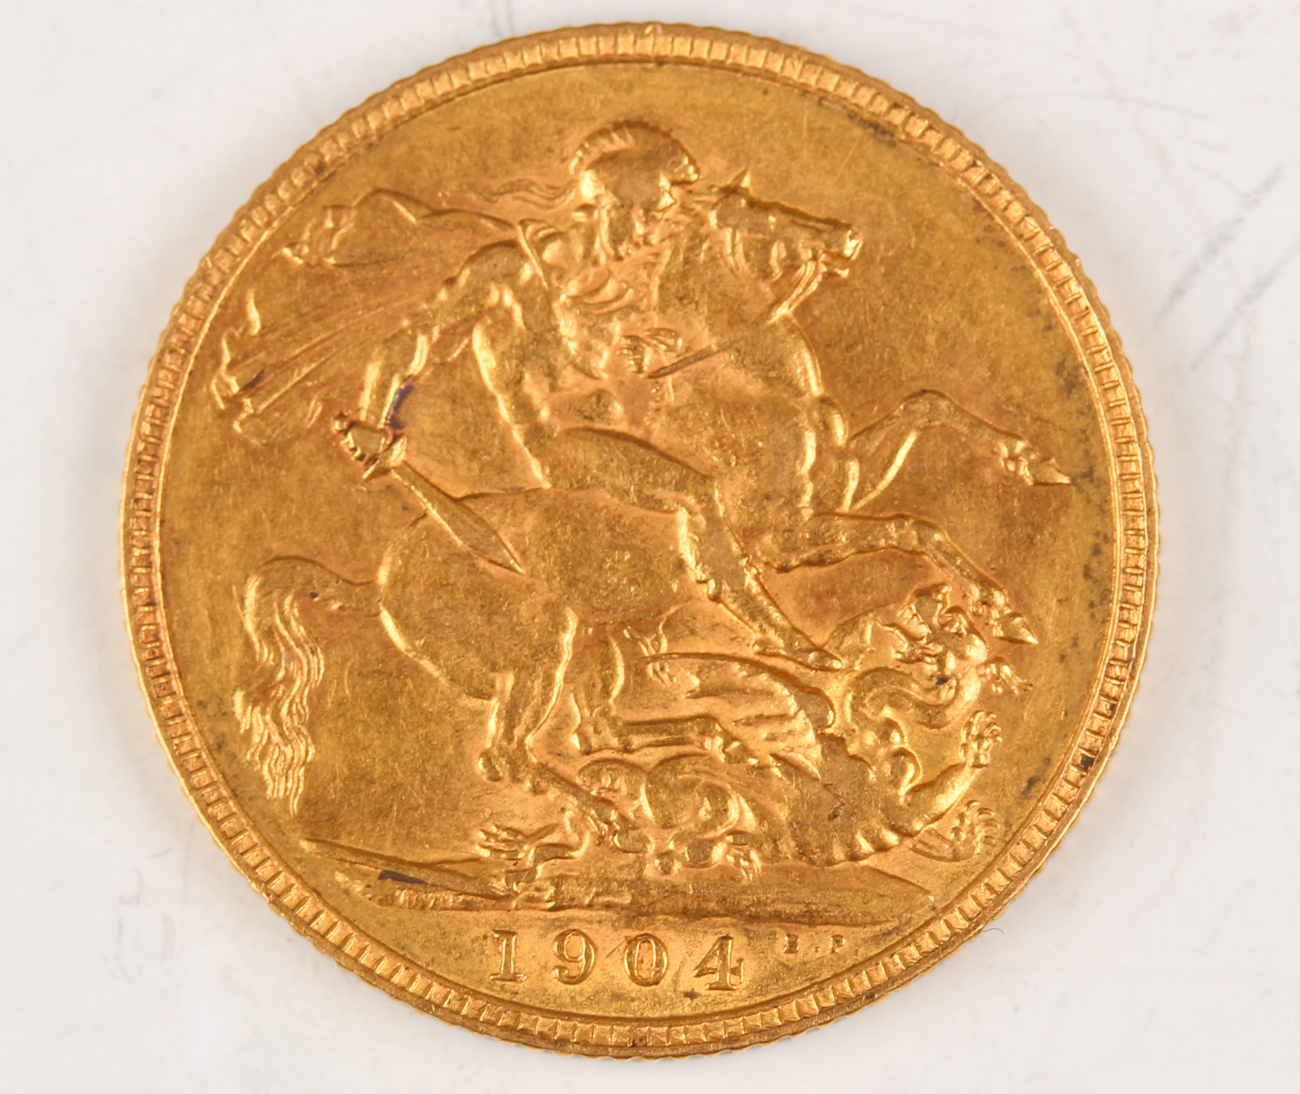 An Edward VII sovereign 1904.Buyer’s Premium 29.4% (including VAT @ 20%) of the hammer price. Lots - Image 2 of 2